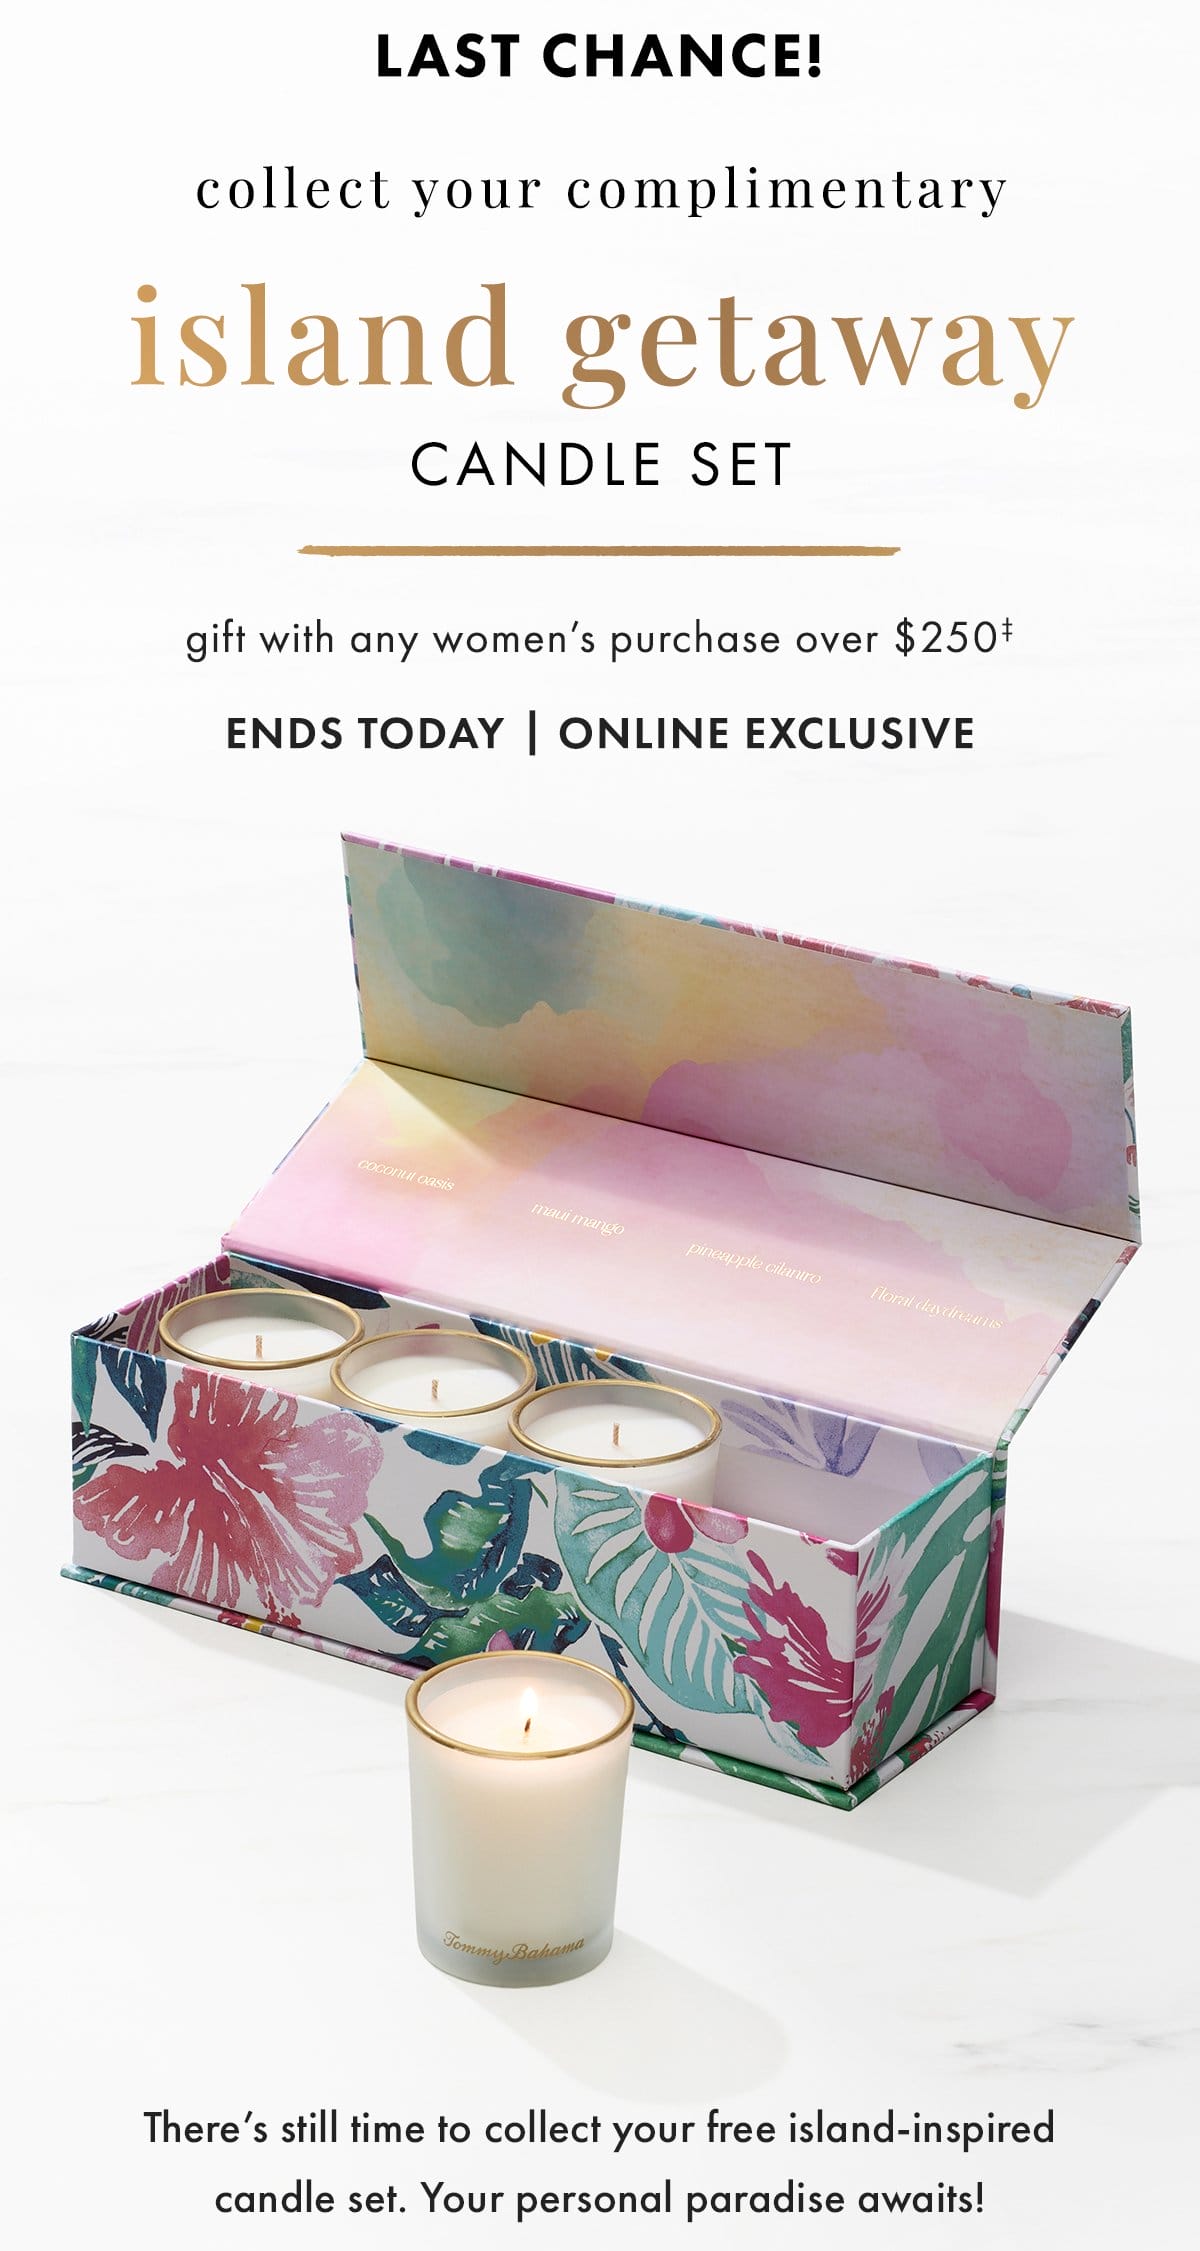 Last chance! Collect your complimentary Island Getaway candle set gift with any women's purchase over \\$250. Ends today | online exclusive. There's still time to collect your free island-inspired candle set. Your personal paradise awaits!